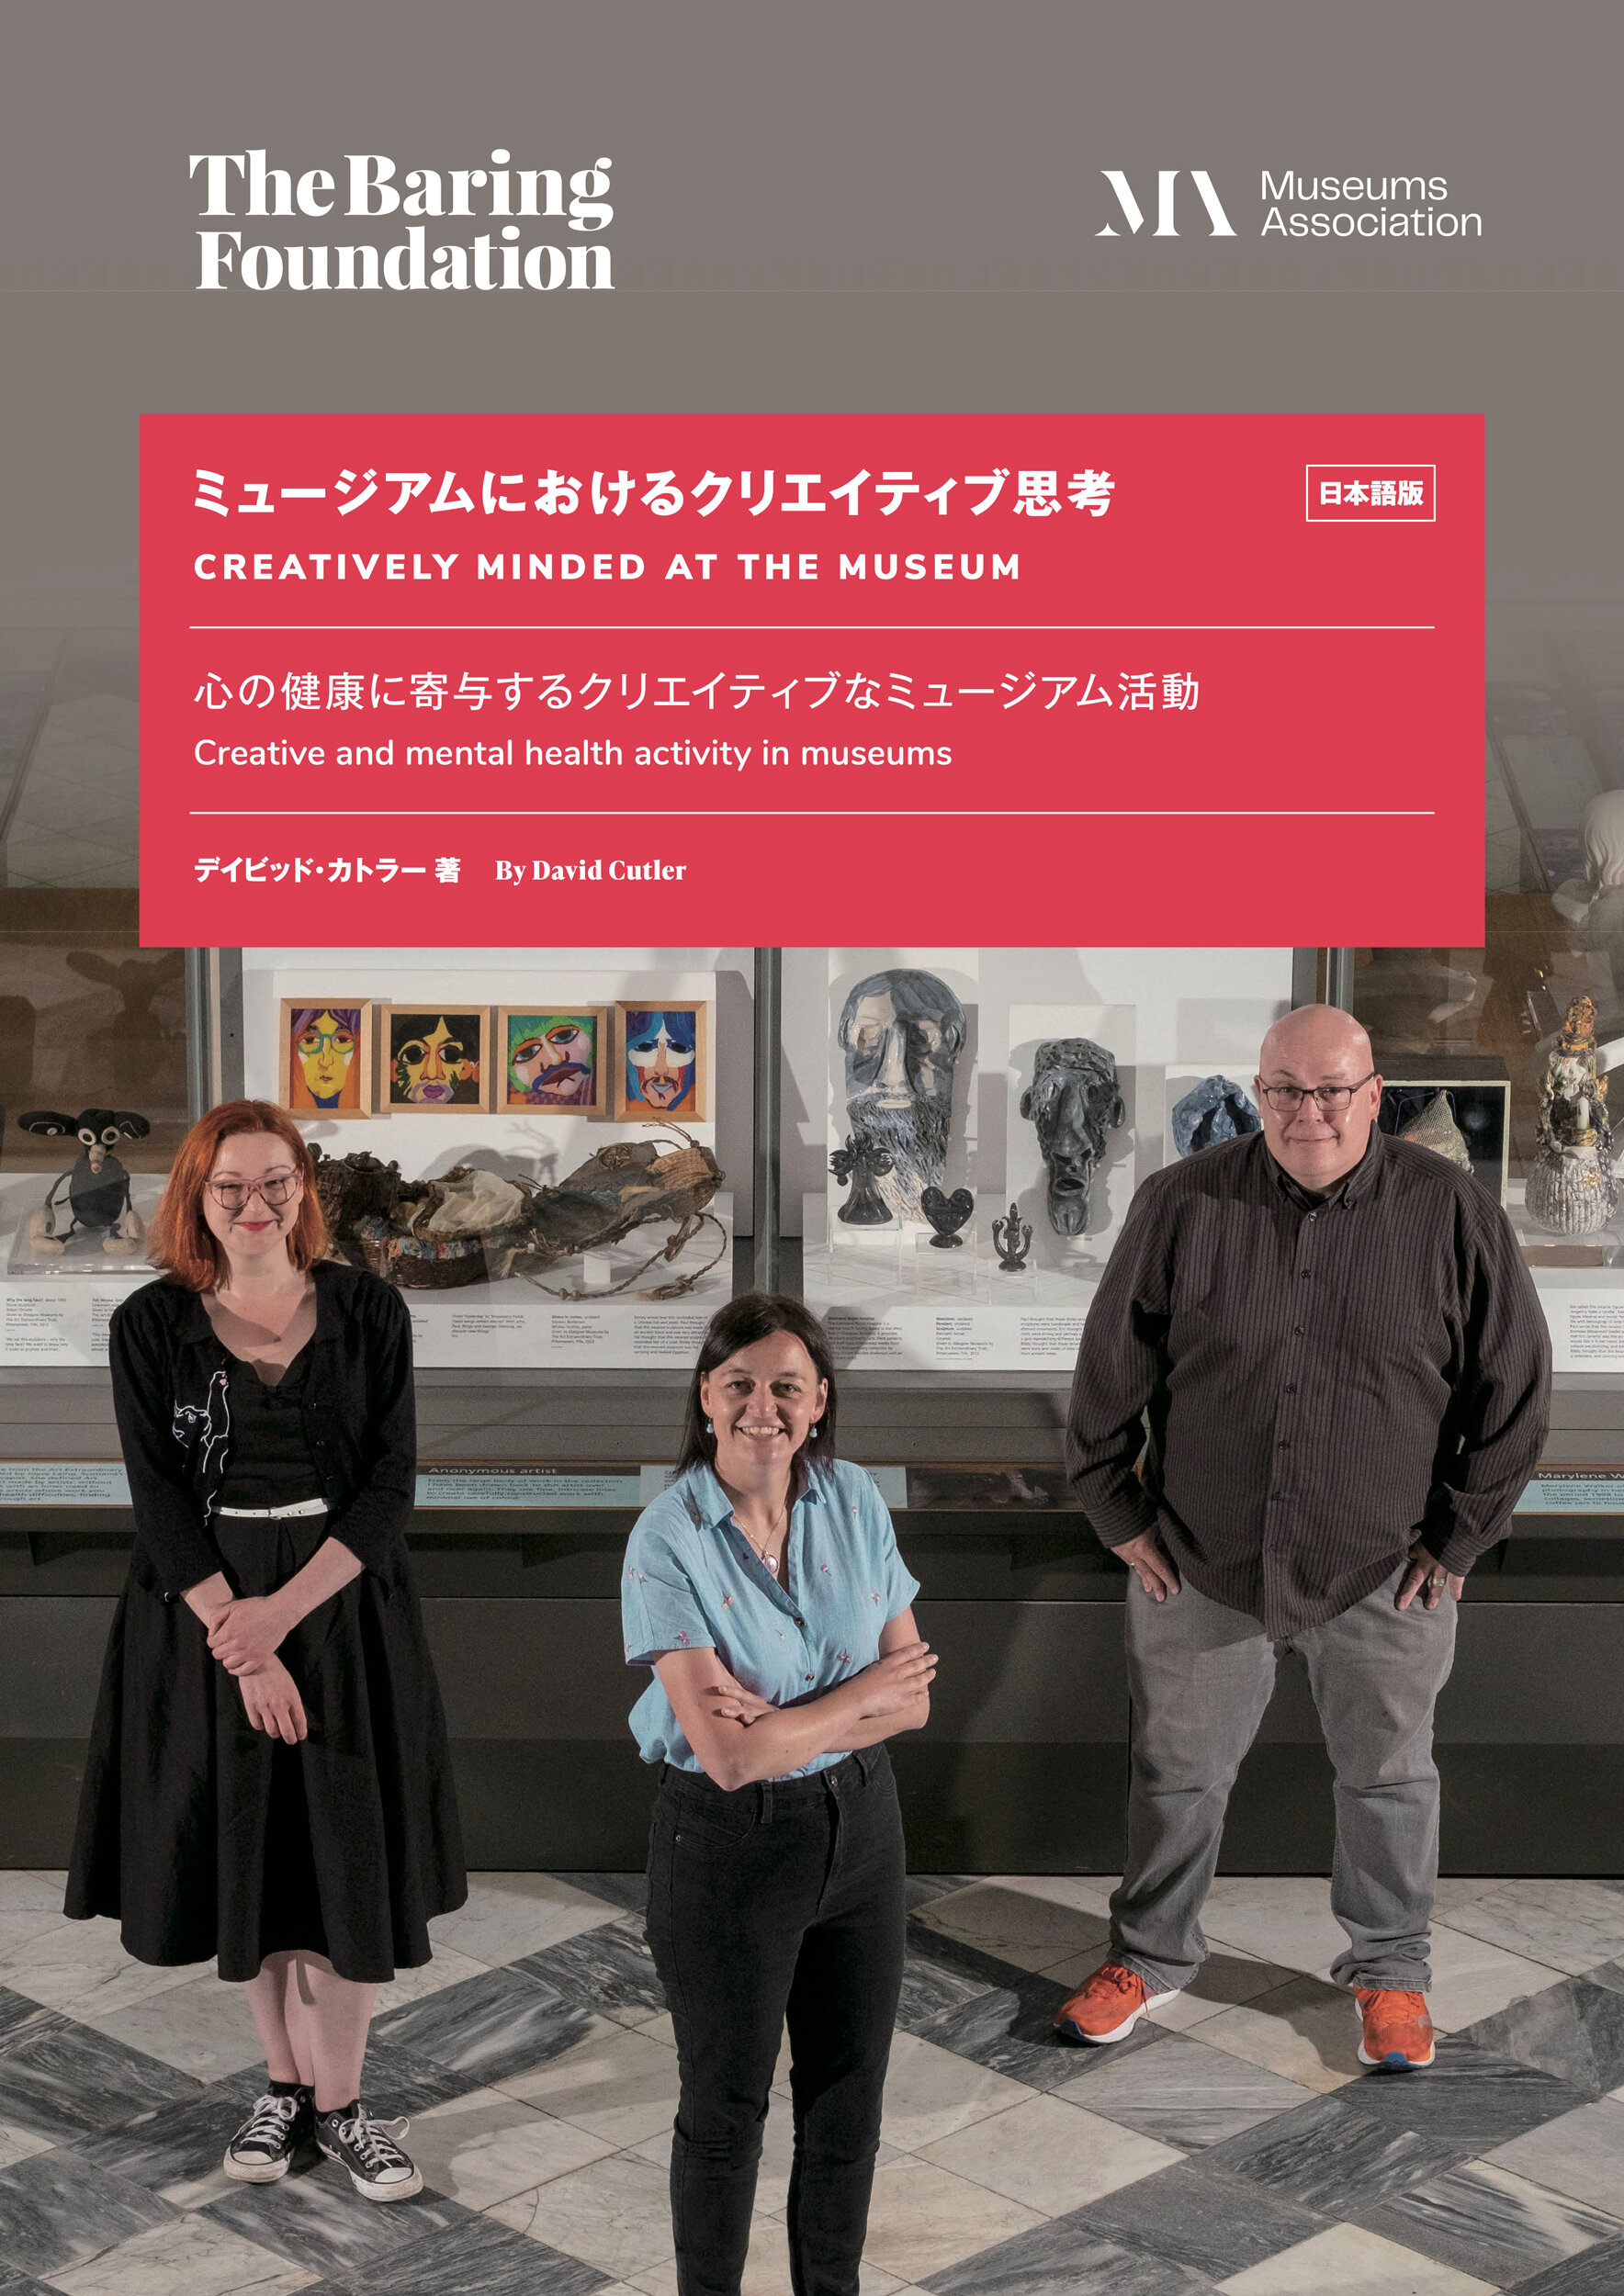 David Cutler, Creatively Minded at the Museum, Creative and mental health activity in museums  [Japanese edition]

